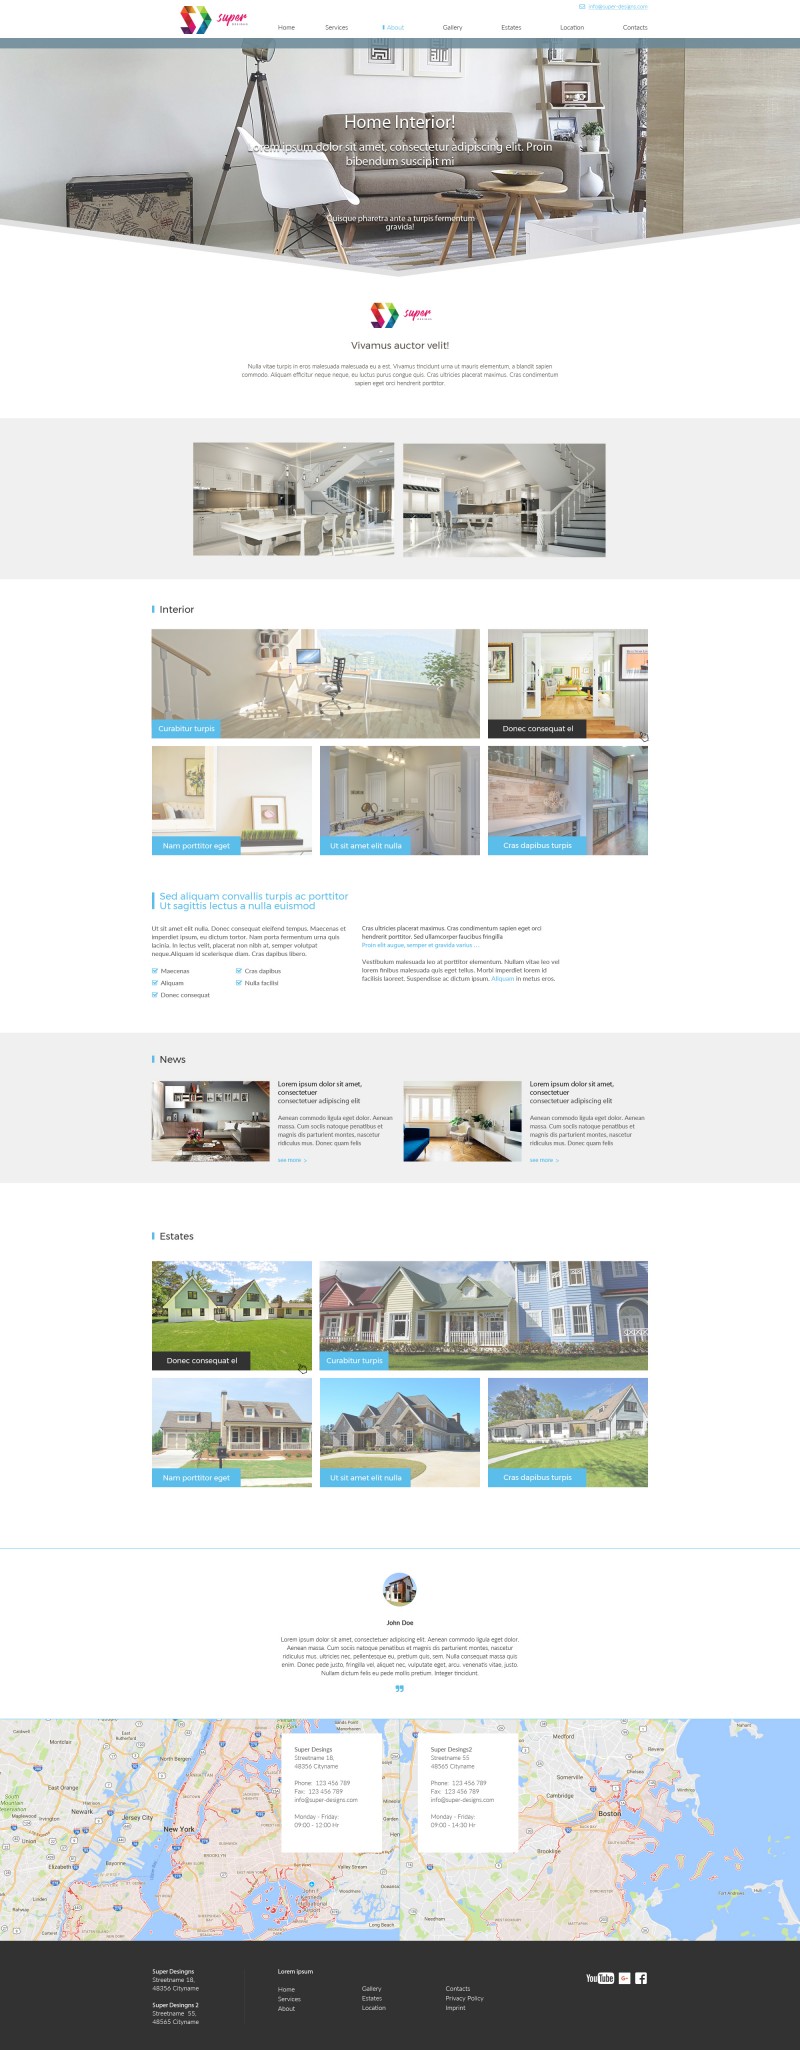 King of the Home Furniture PSD Template